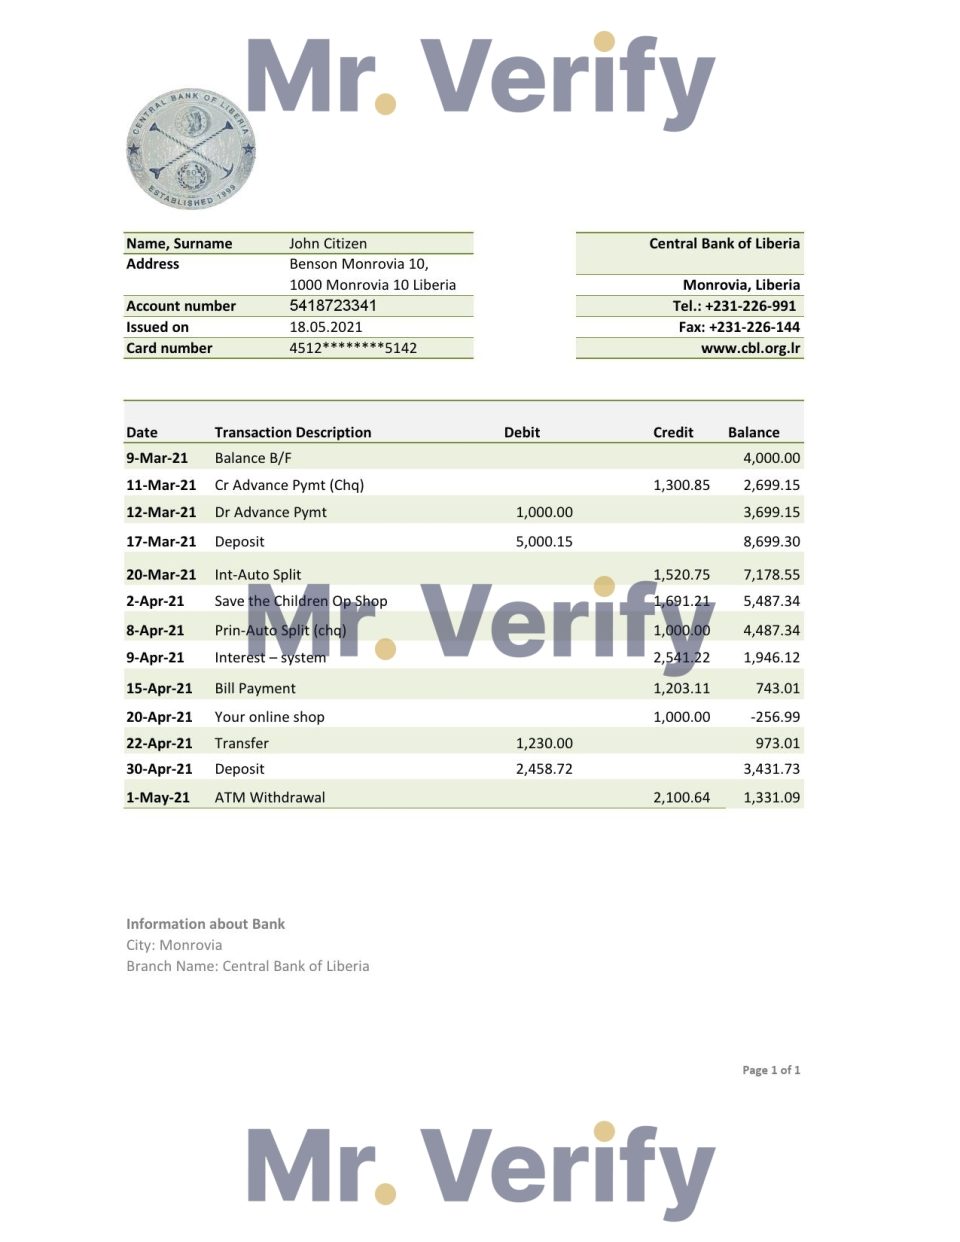 Liberia Central Bank of Liberia bank statement easy to fill template in .xls and .pdf file format